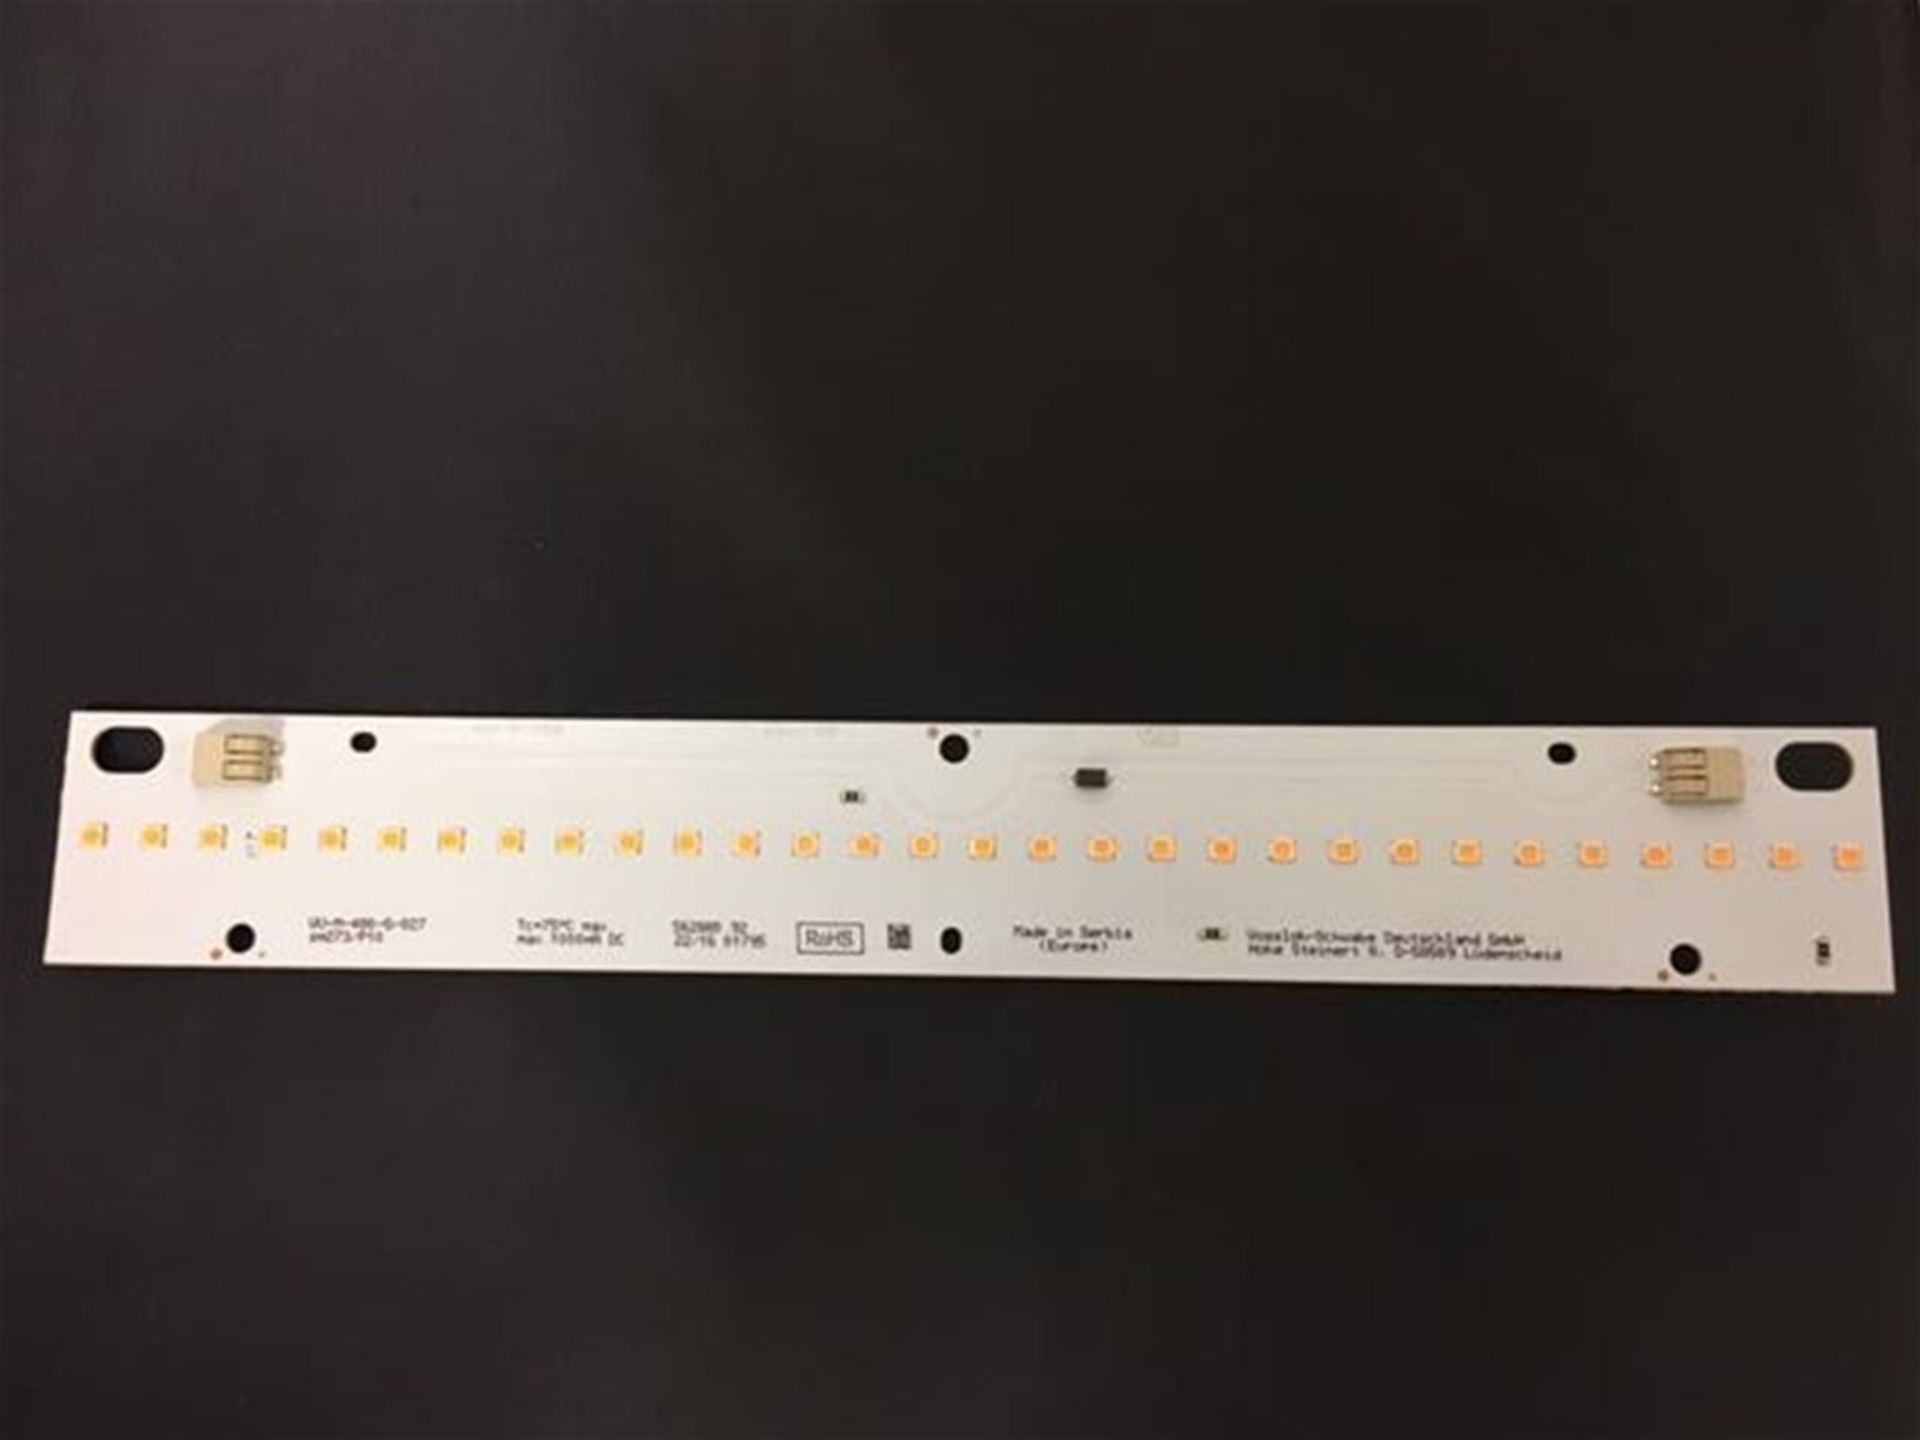 New 50x LED Boards wu-m480-g-827 By Vossloh Schwabe